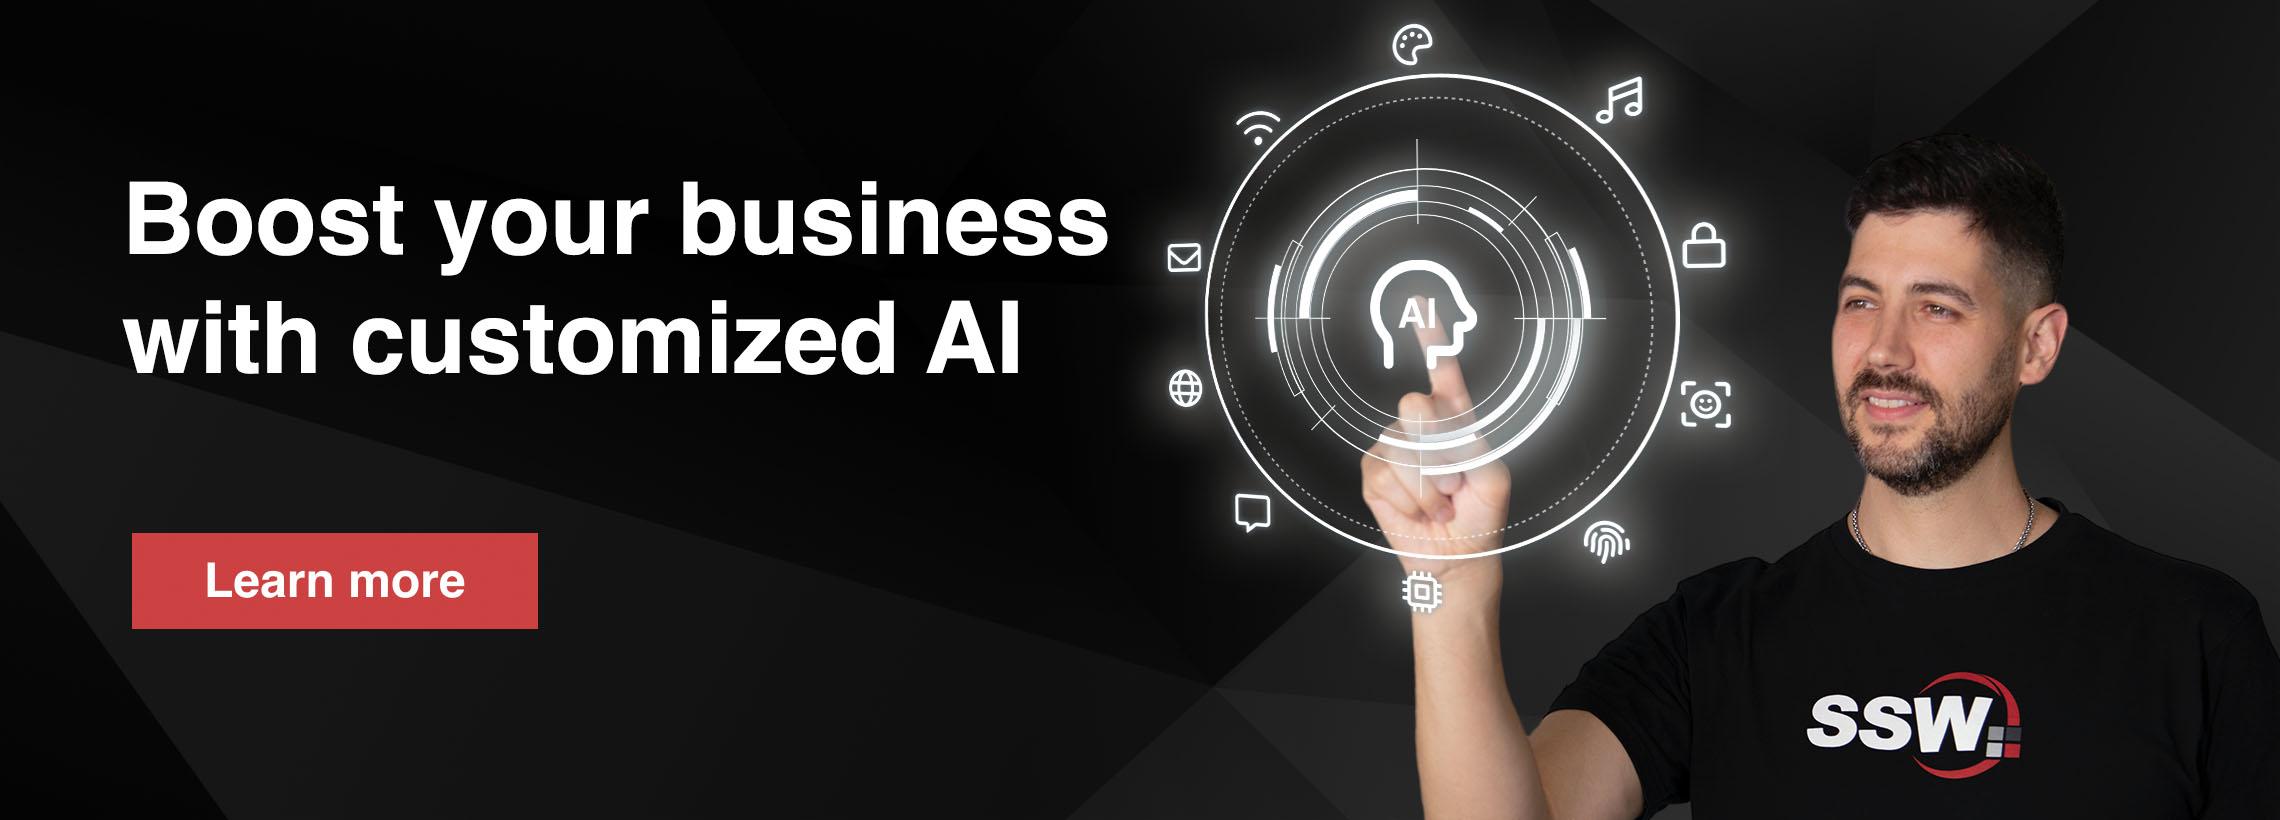 Boost Business with AI